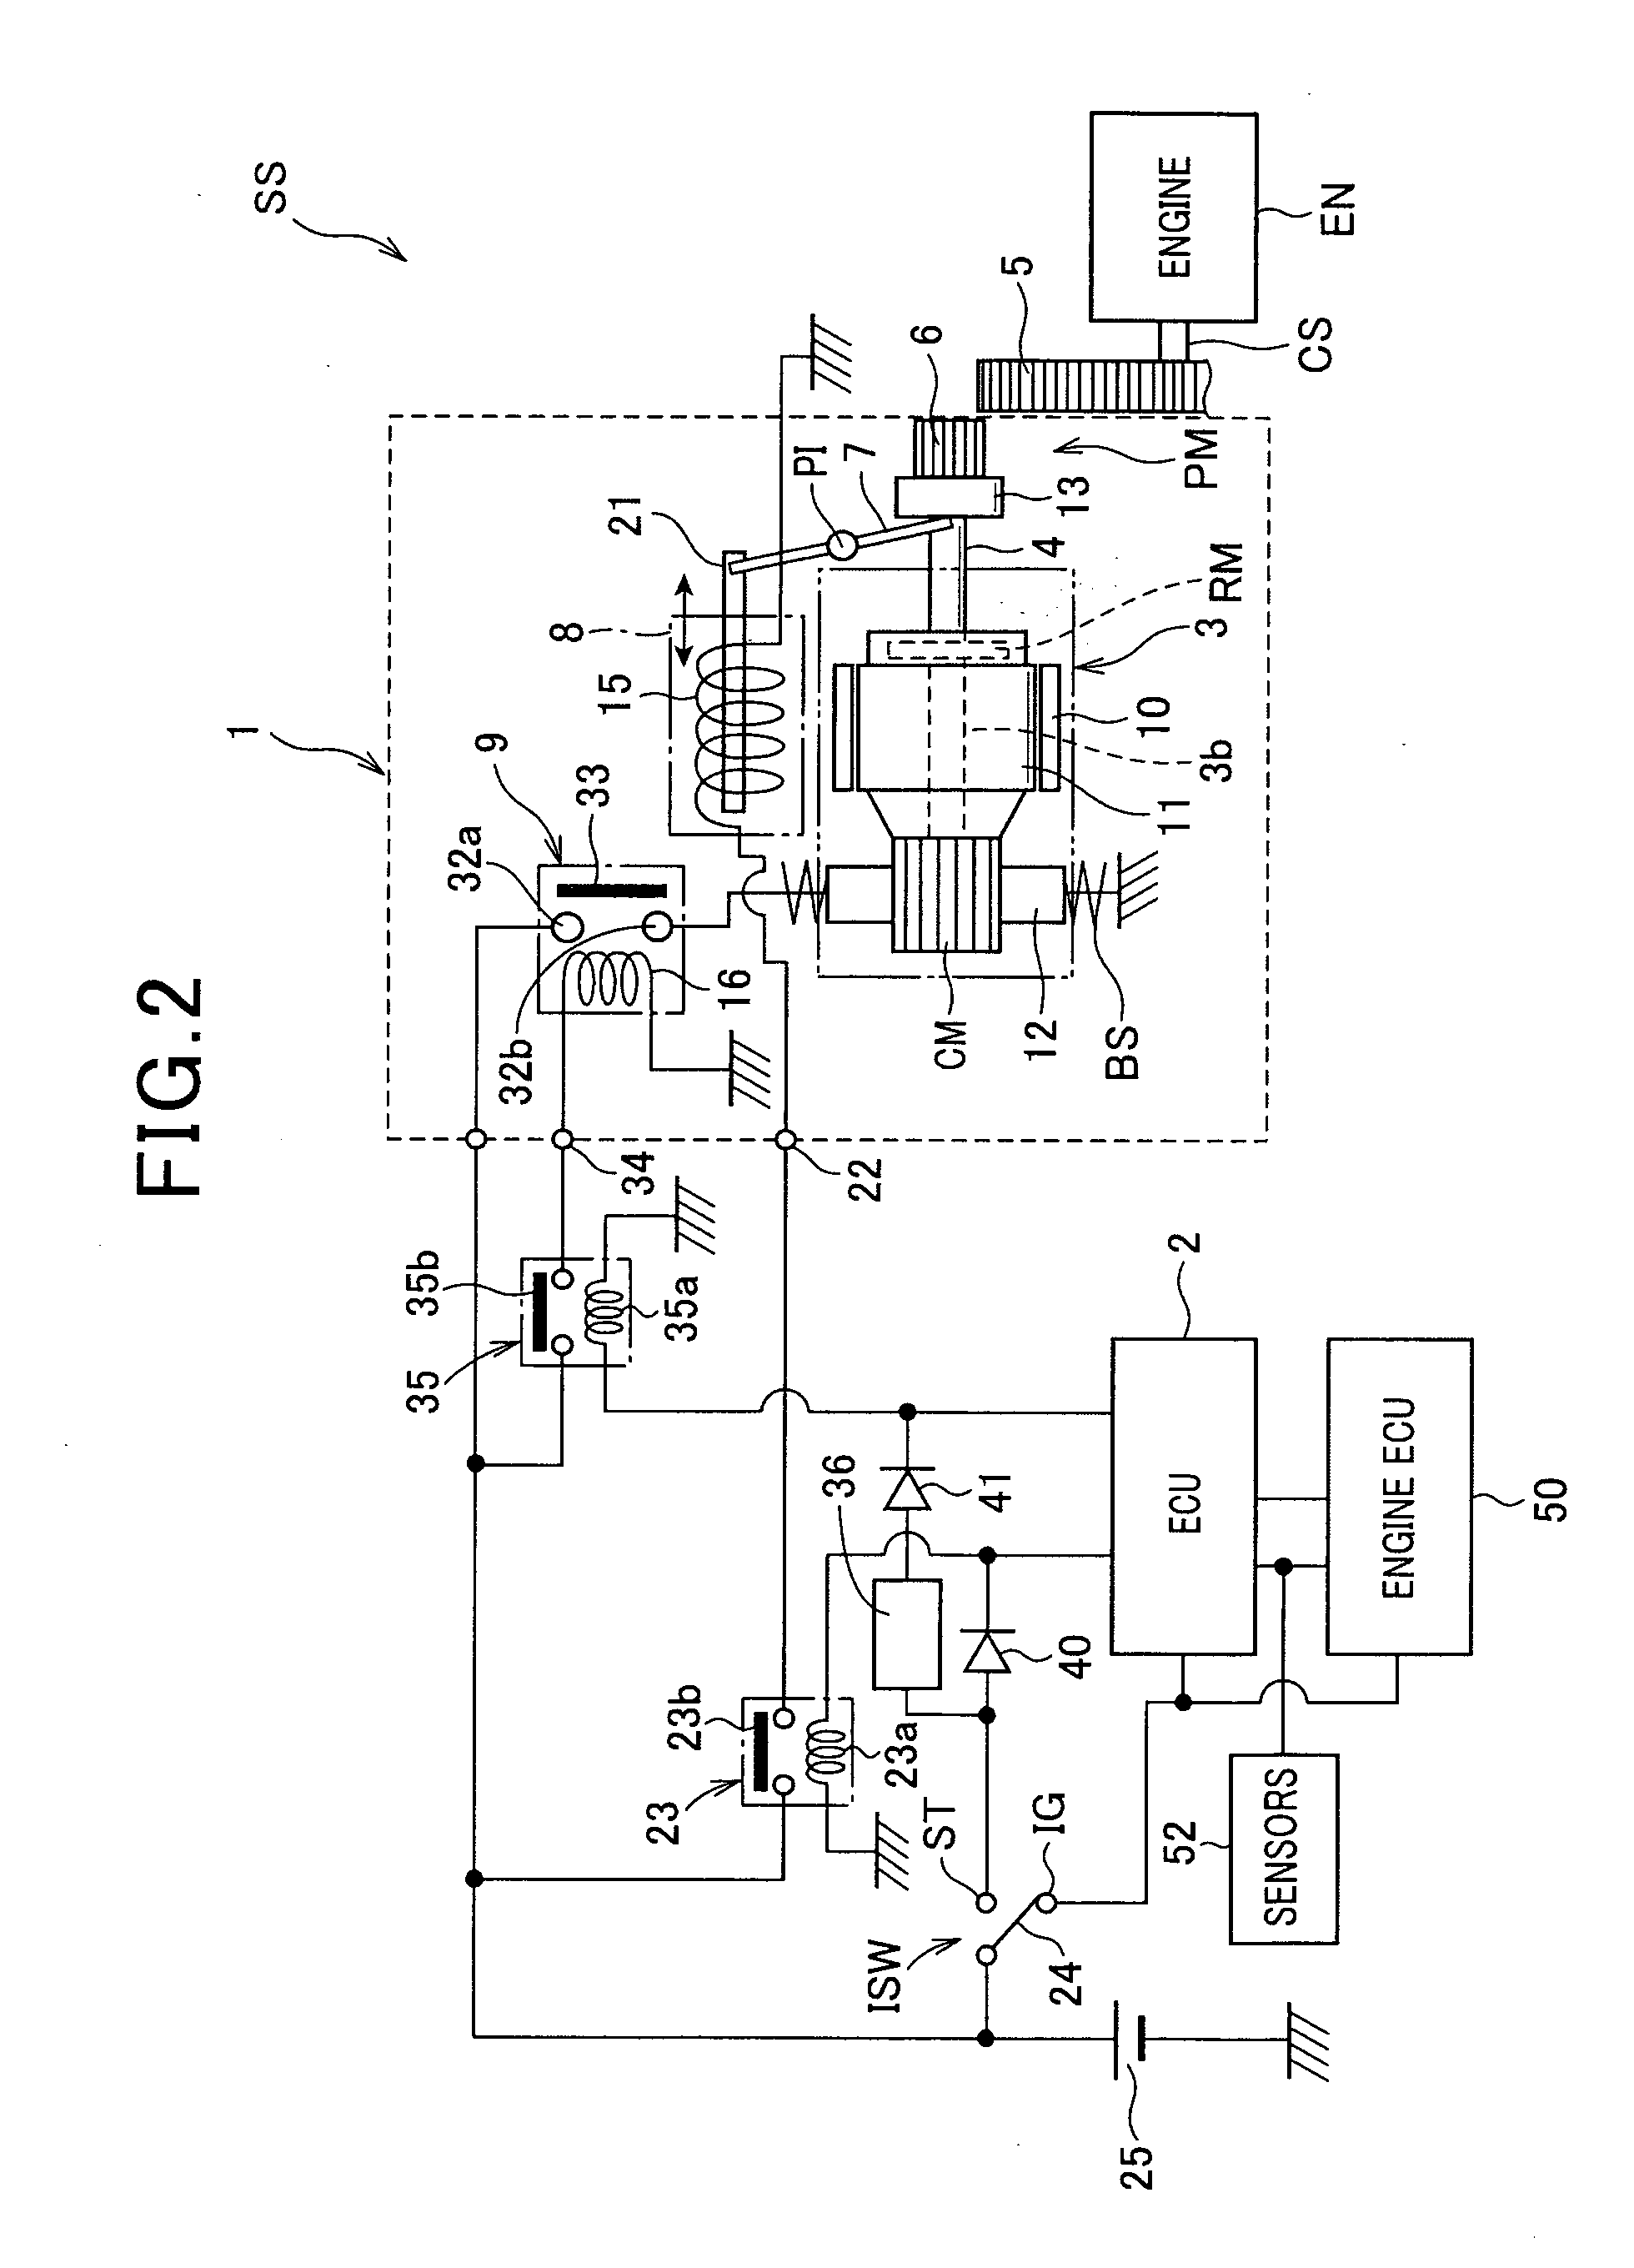 System for starting internal combustion engine